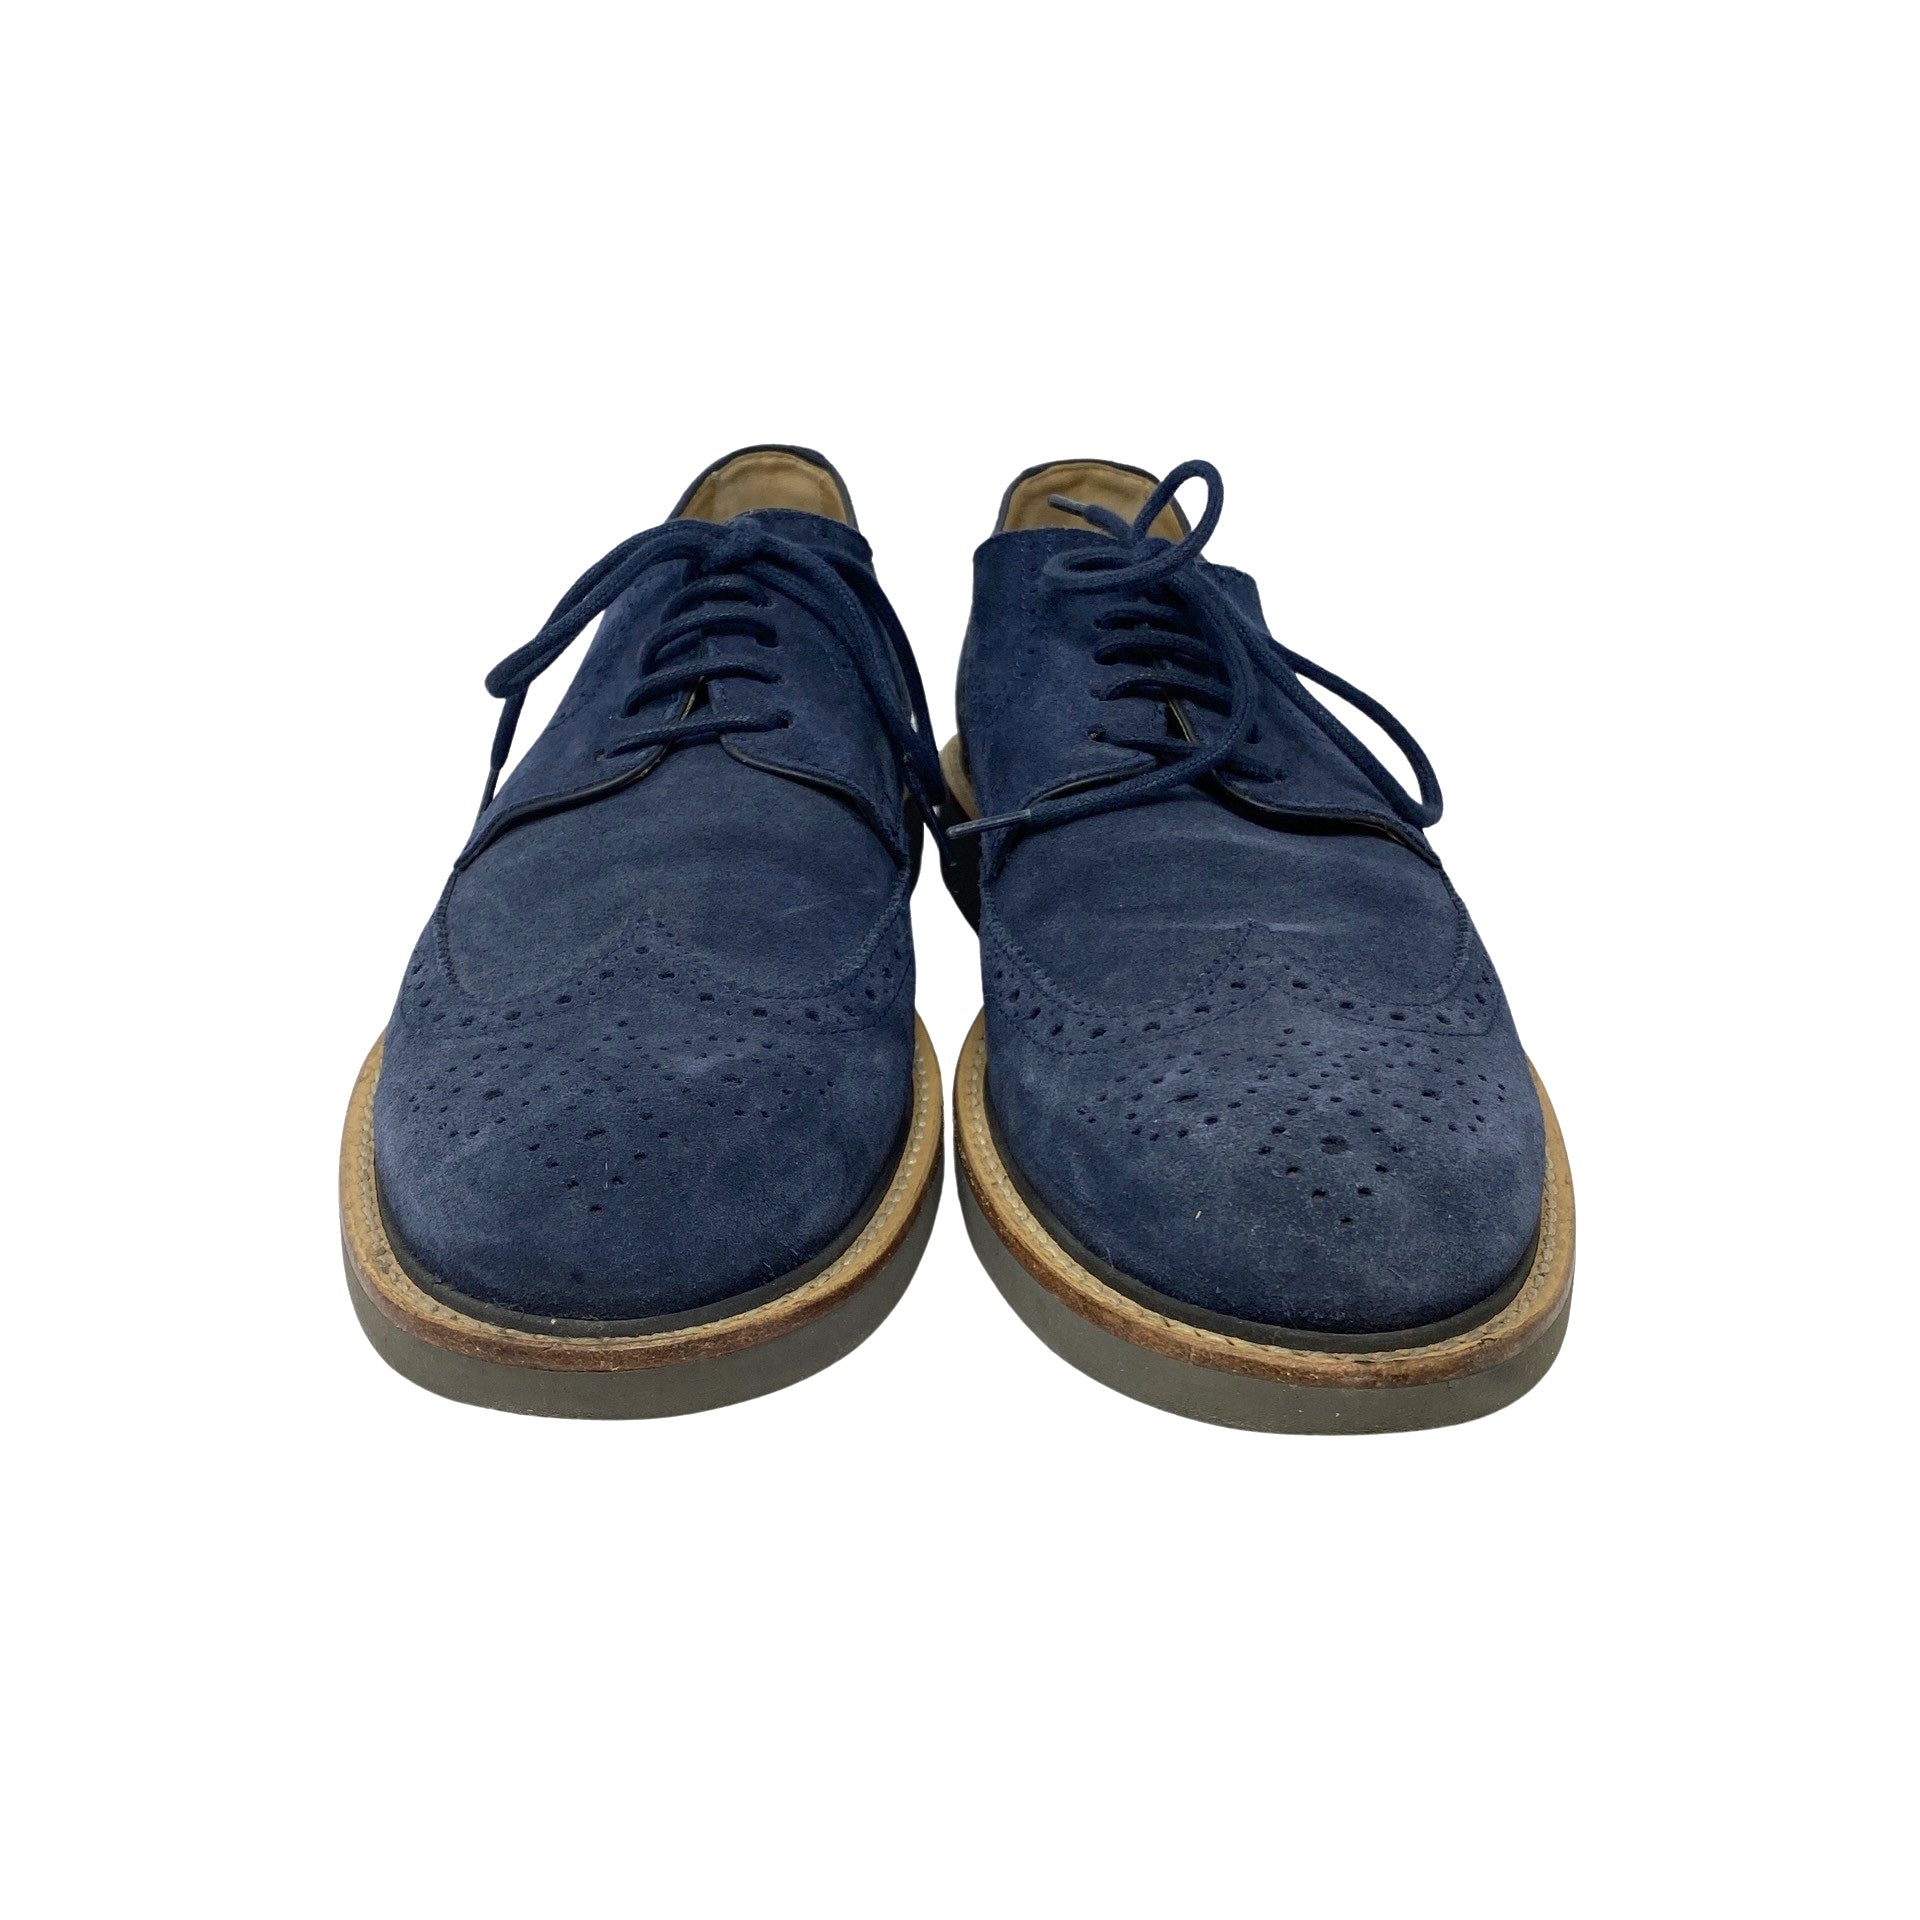 Tod's Suede Wingtip Brogue Lace Up Shoes